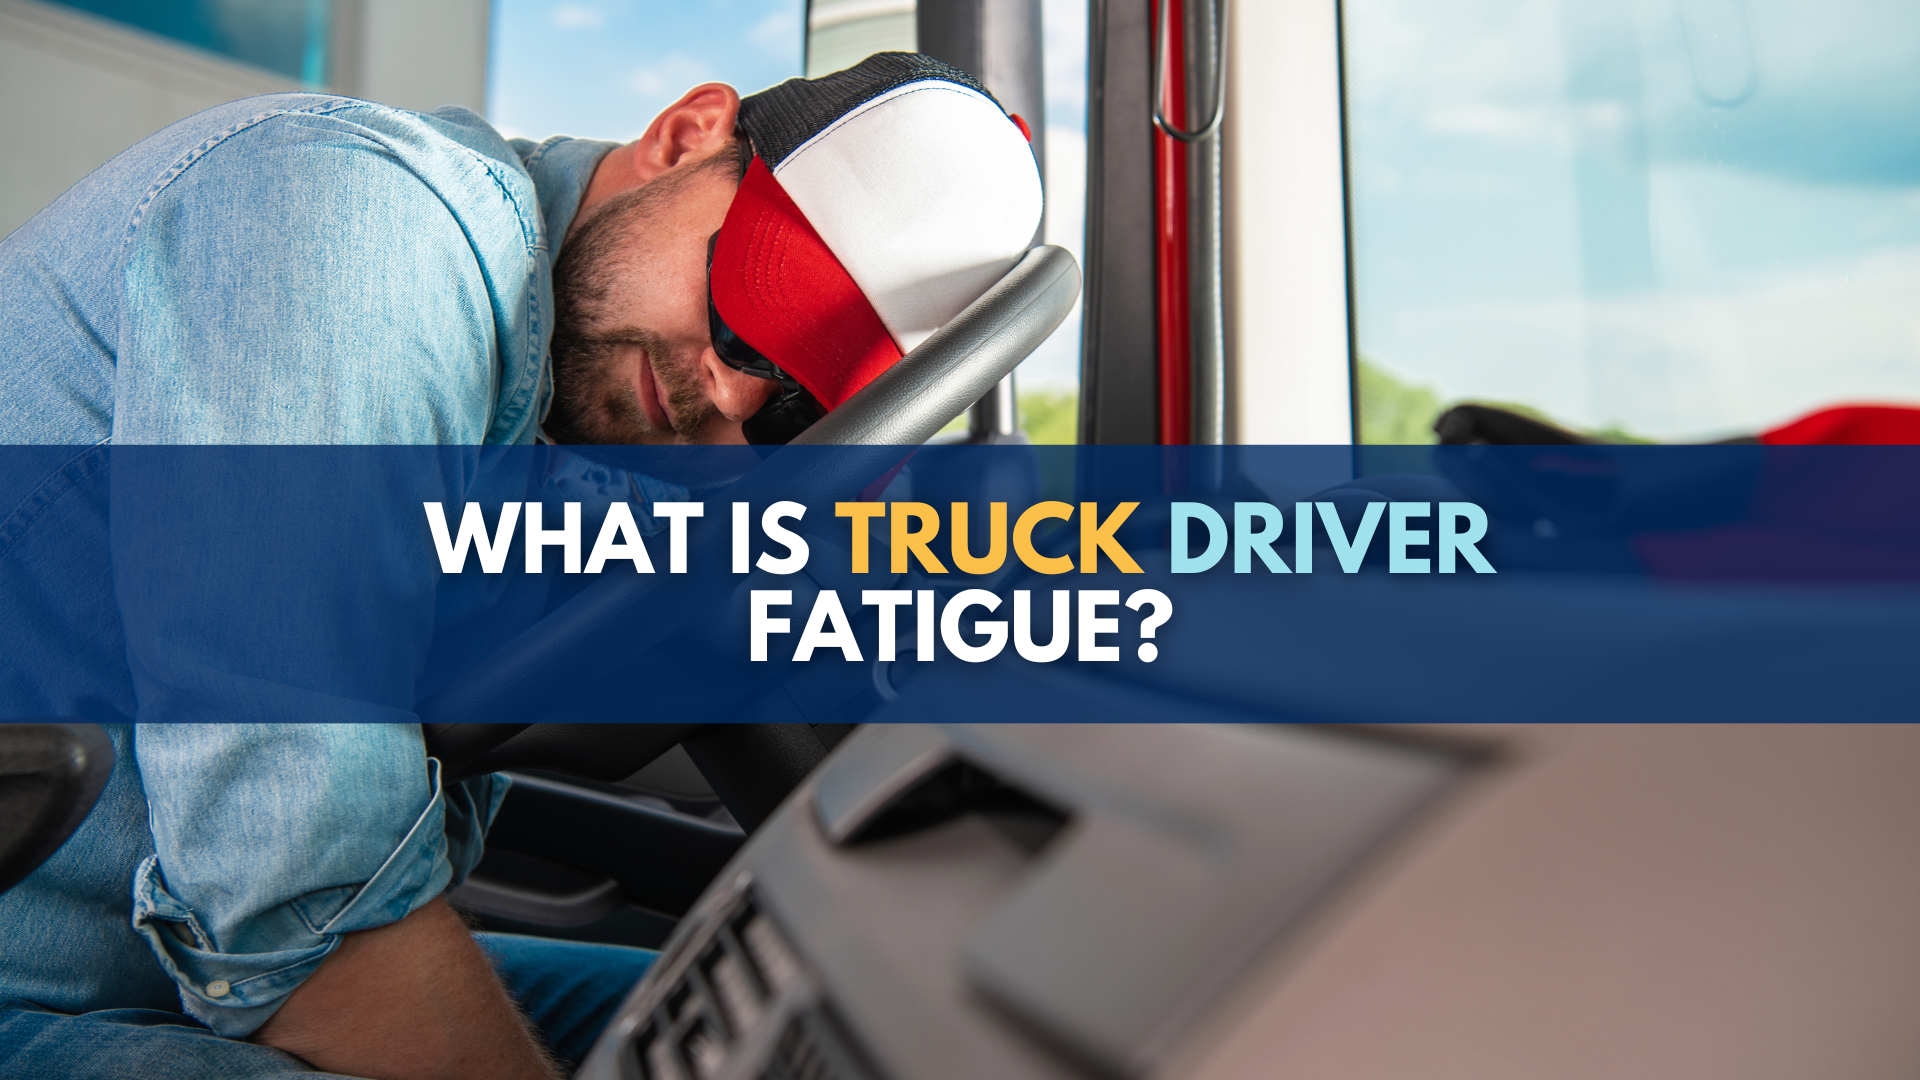 What is truck driver fatigue?